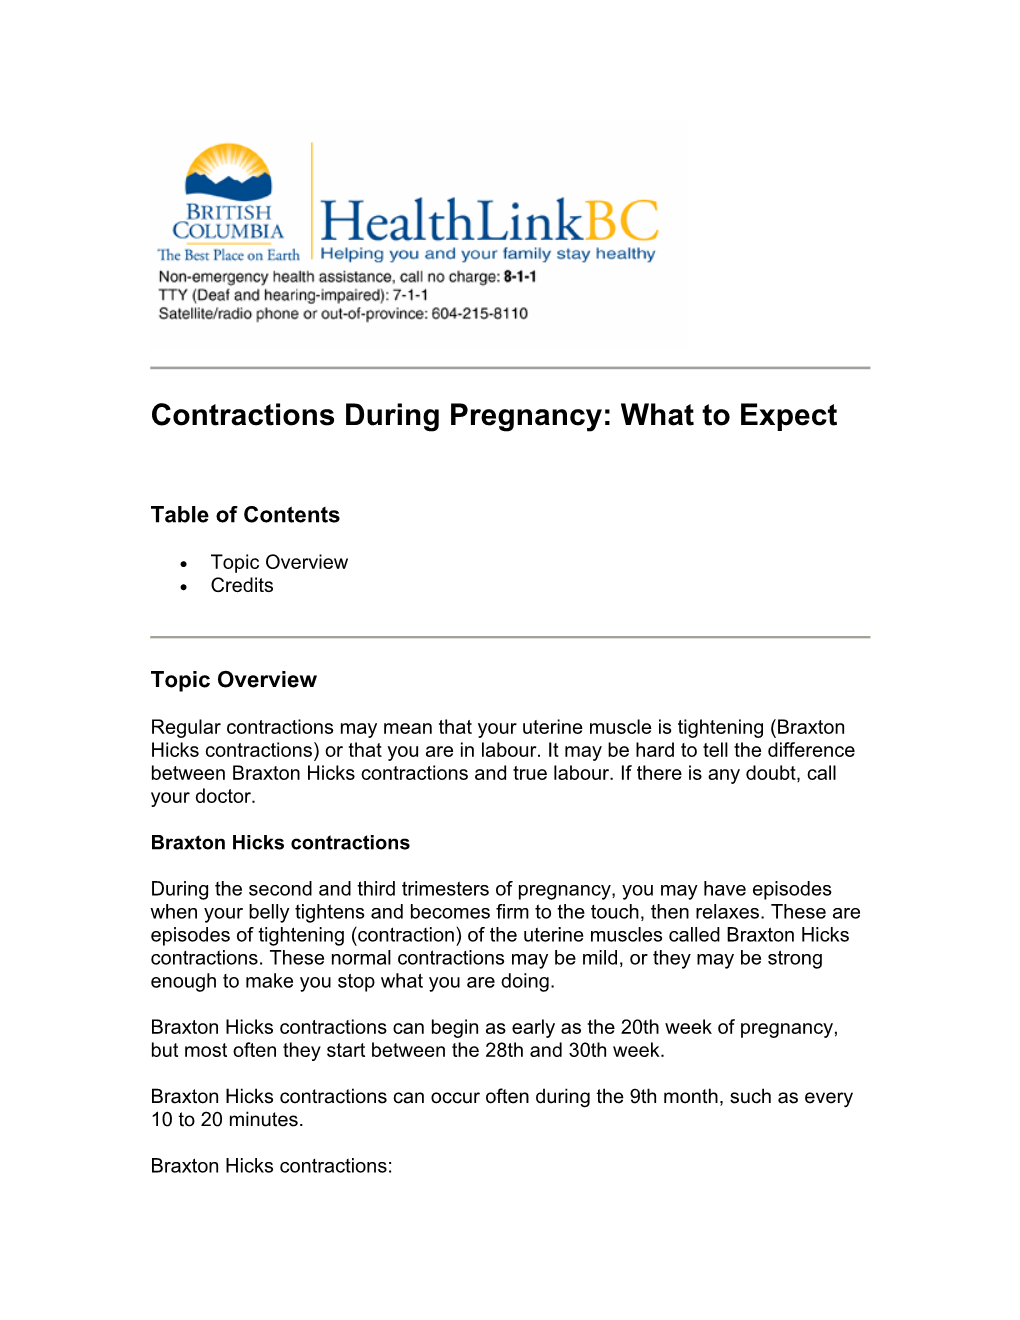 Contractions During Pregnancy: What to Expect